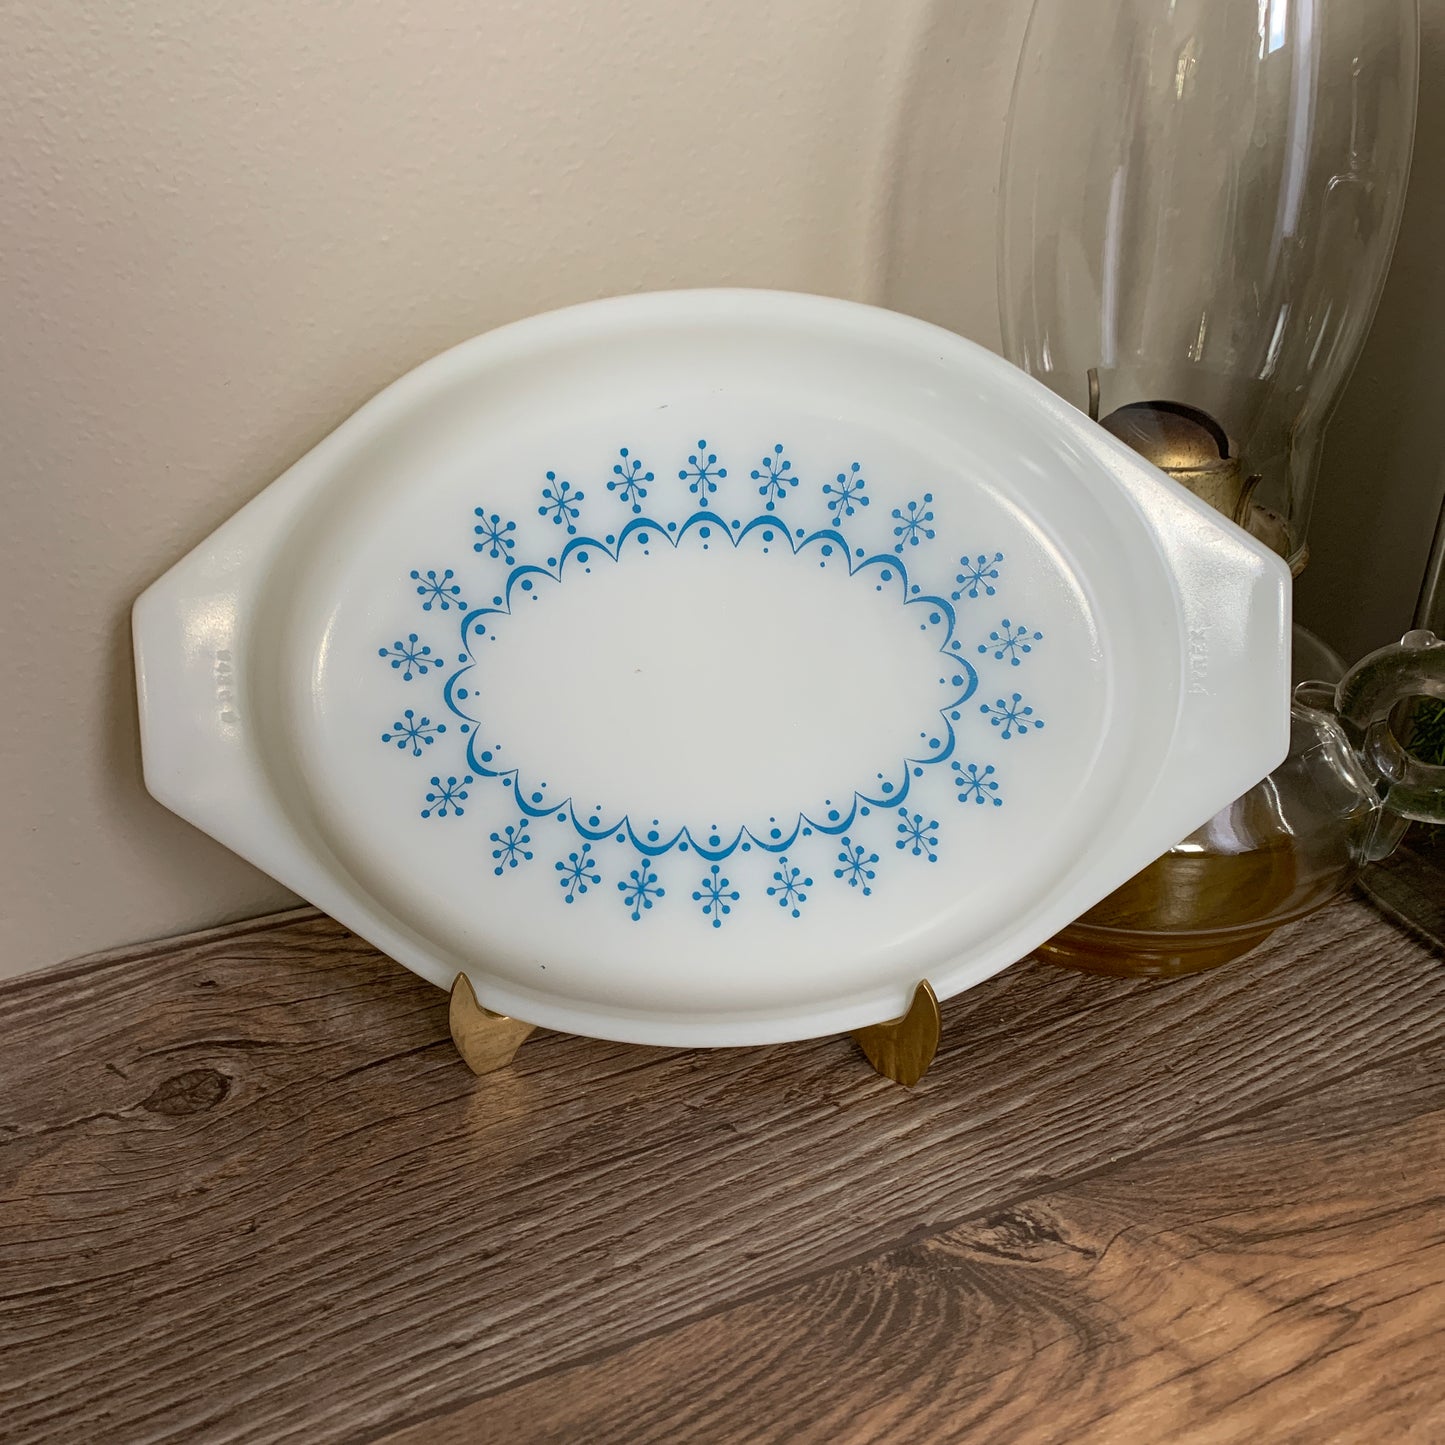 Pyrex Replacement Lid Pyrex Snowflake Lid Replacement Oval Lid Pyrex Garland 943